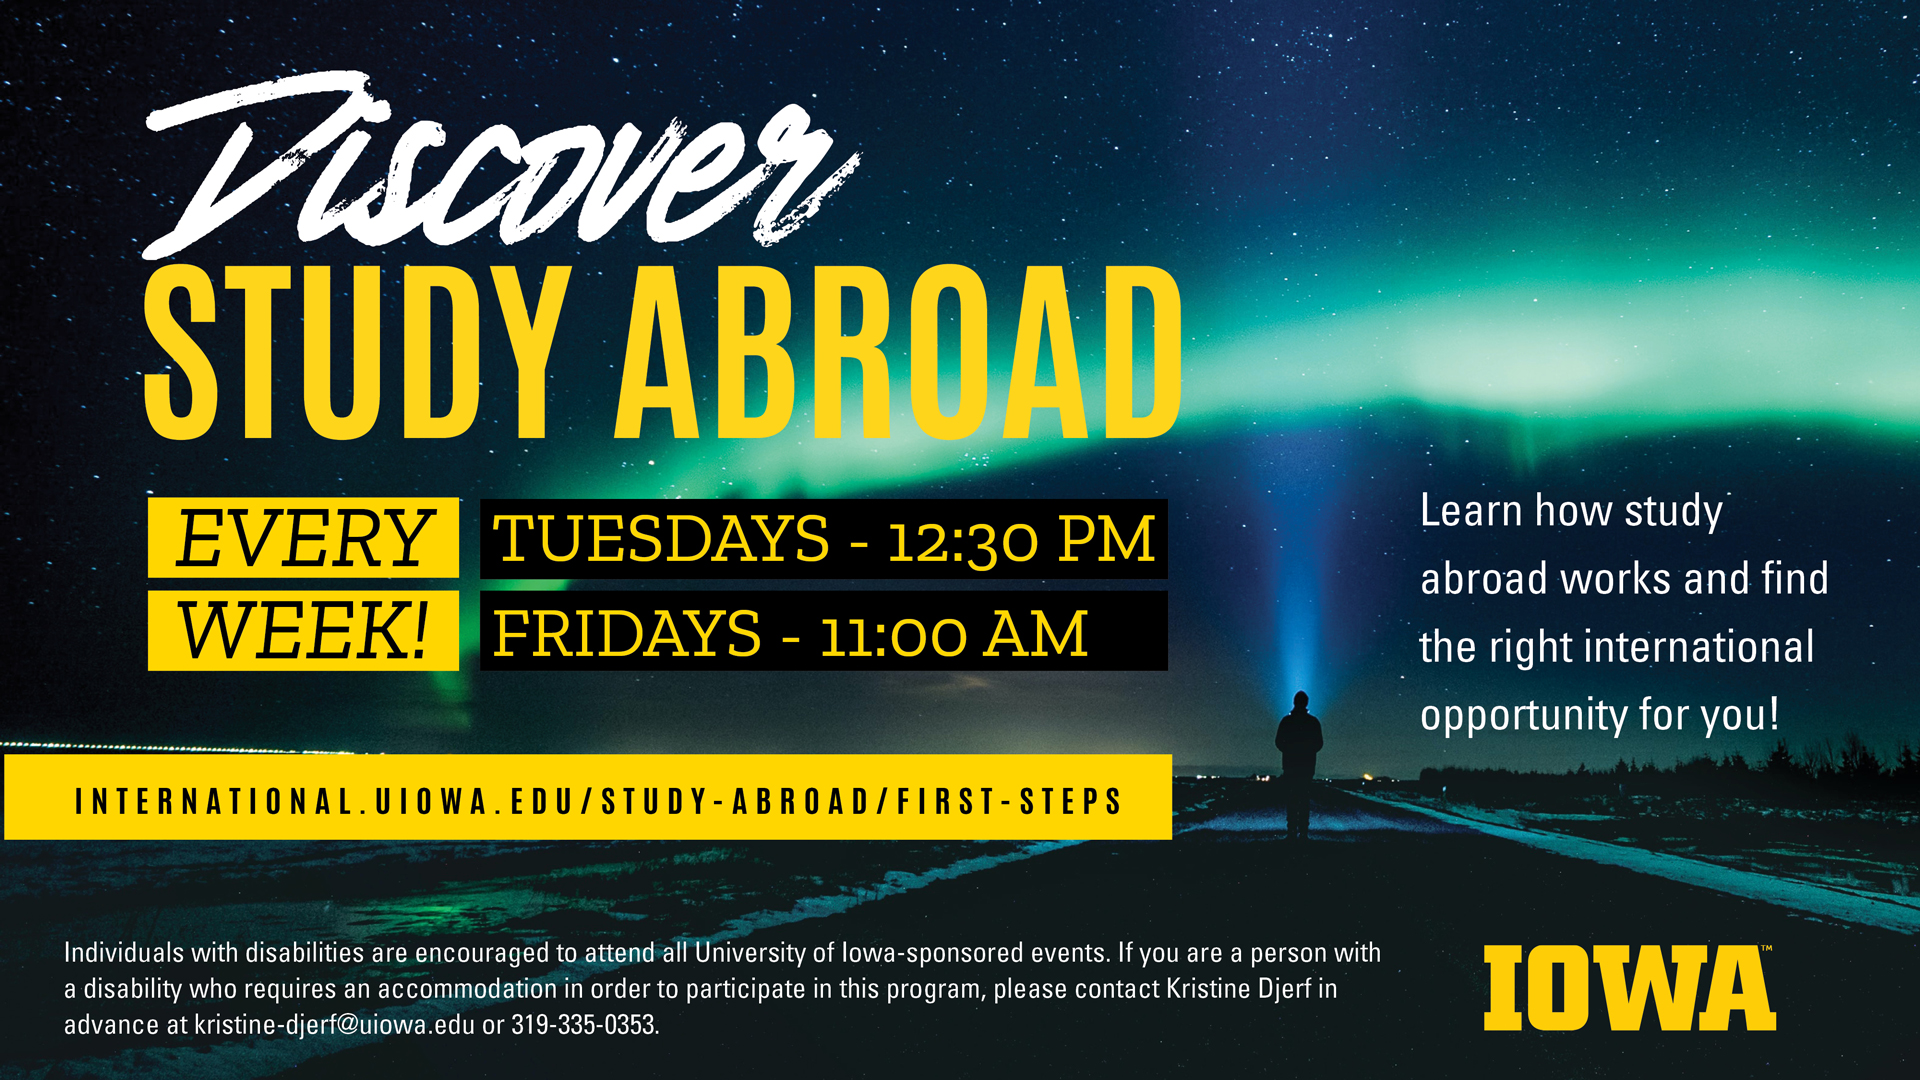 Study abroad info every week tuesdays 12:30 and fridays 11 am